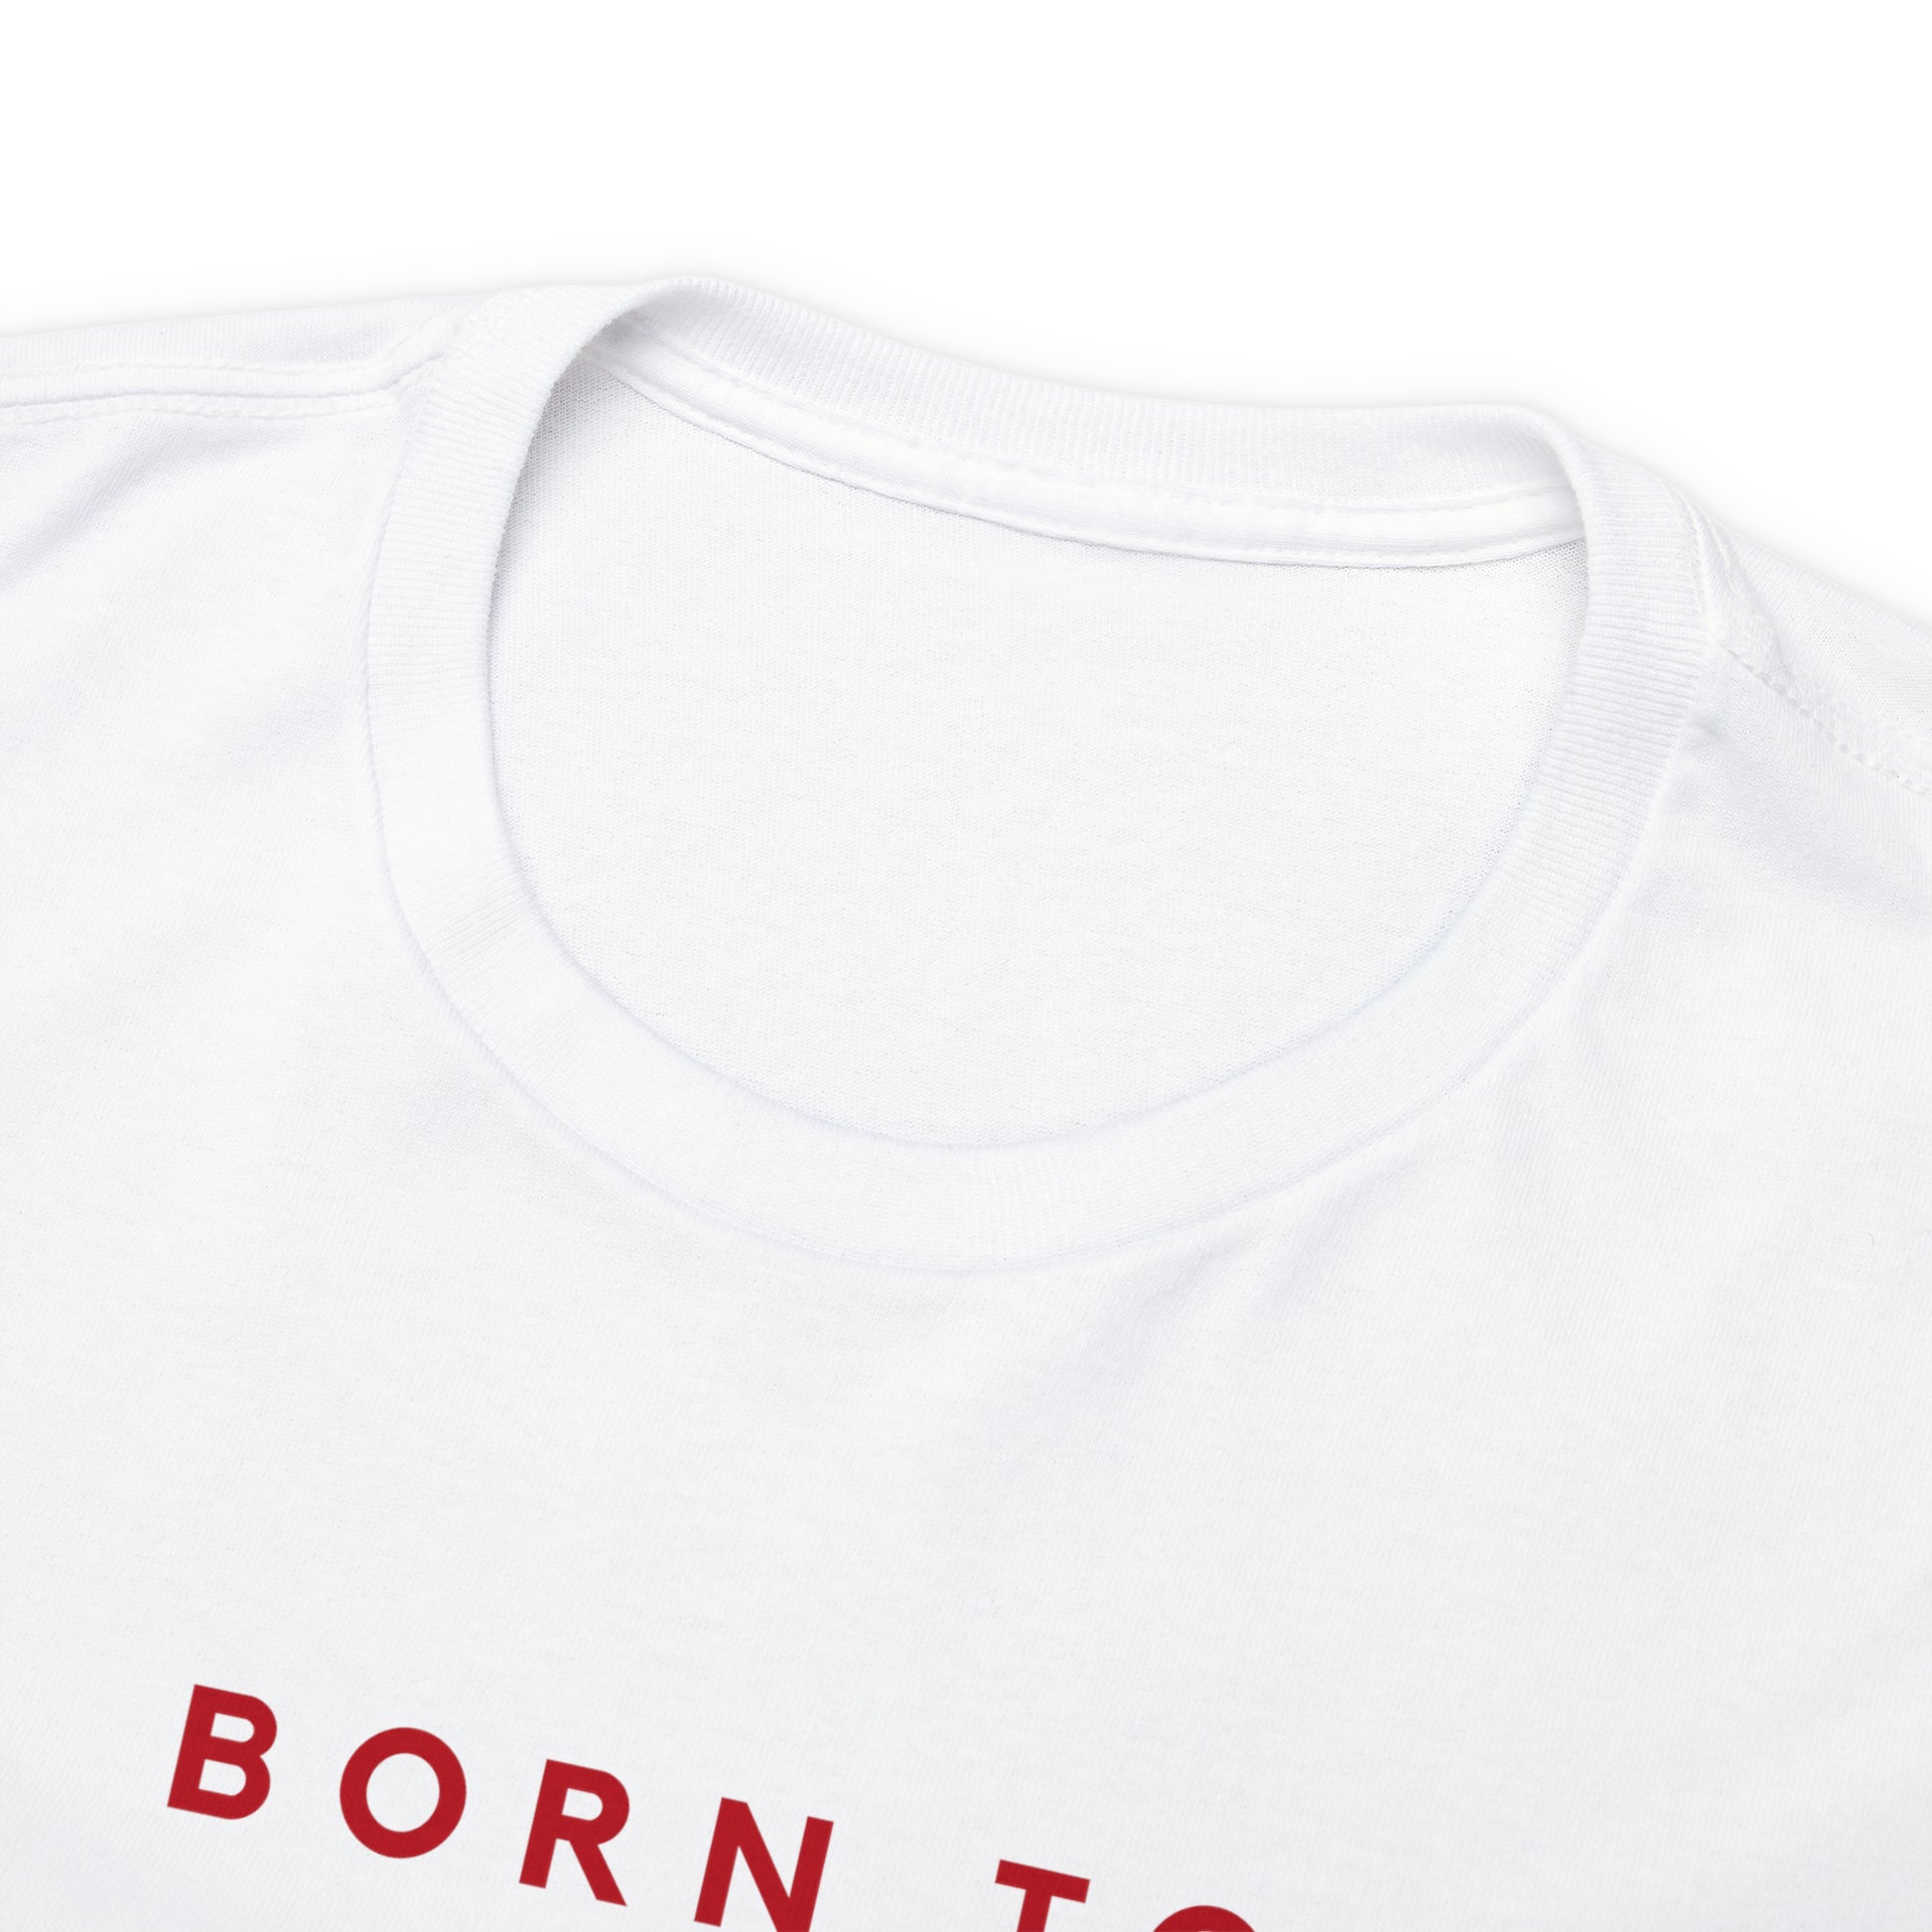 "Born To Grill" T-Shirt - Weave Got Gifts - Unique Gifts You Won’t Find Anywhere Else!